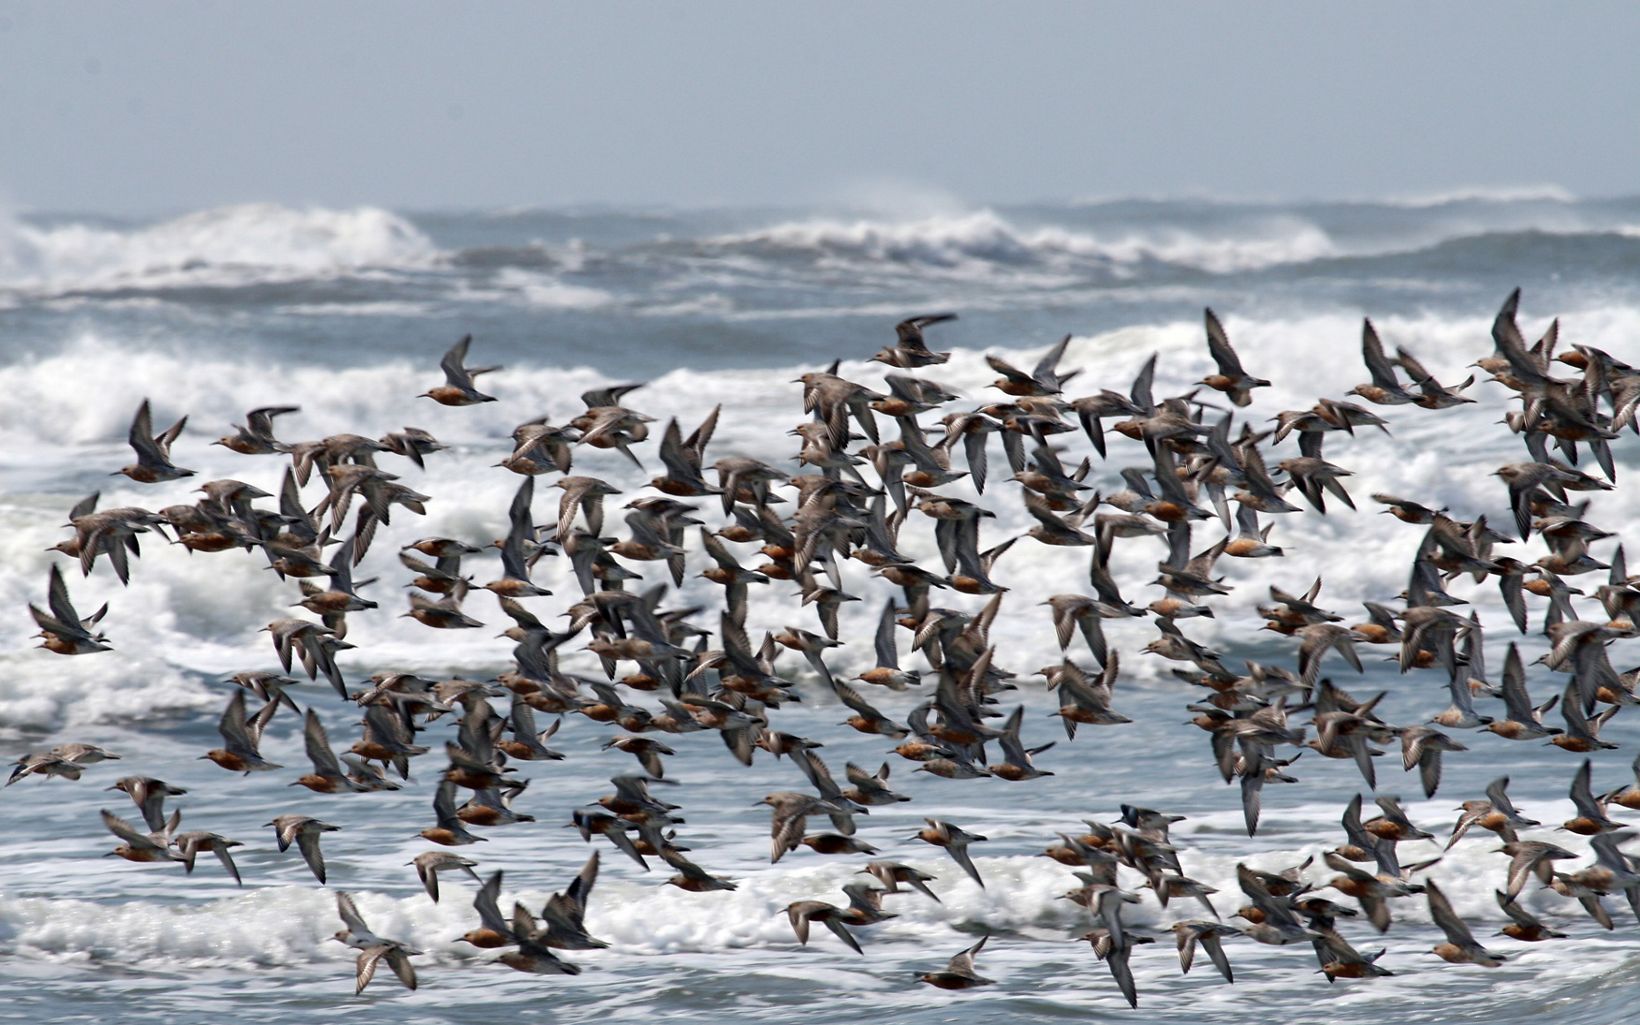 Hundreds of small, brown and gray birds flying in a dense flock over breaking waves.